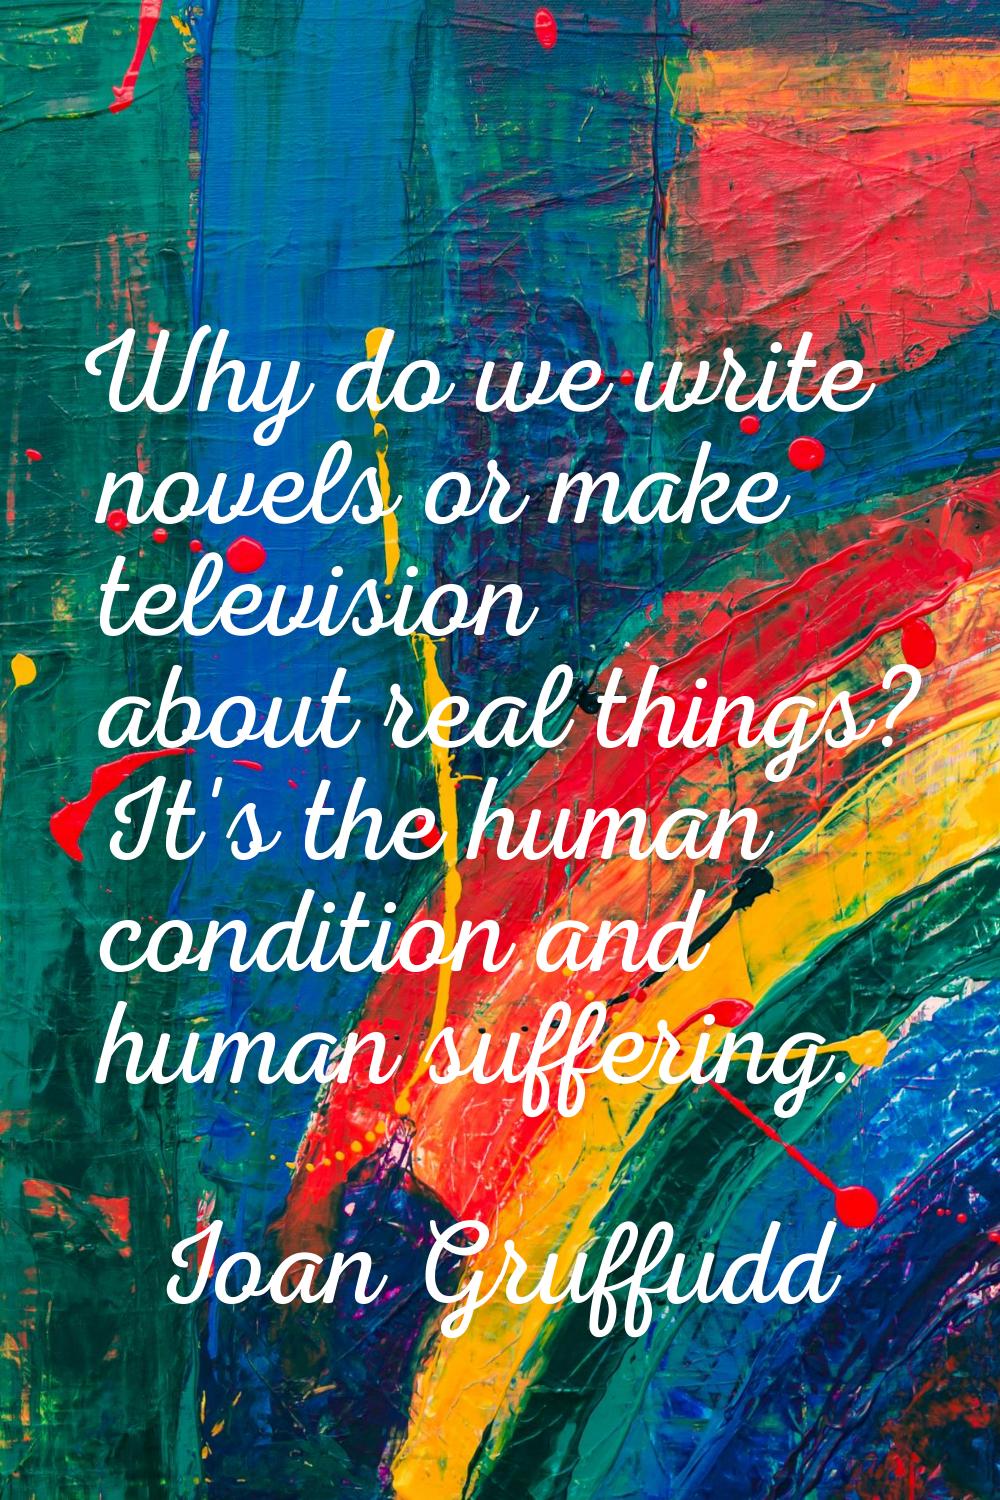 Why do we write novels or make television about real things? It's the human condition and human suf